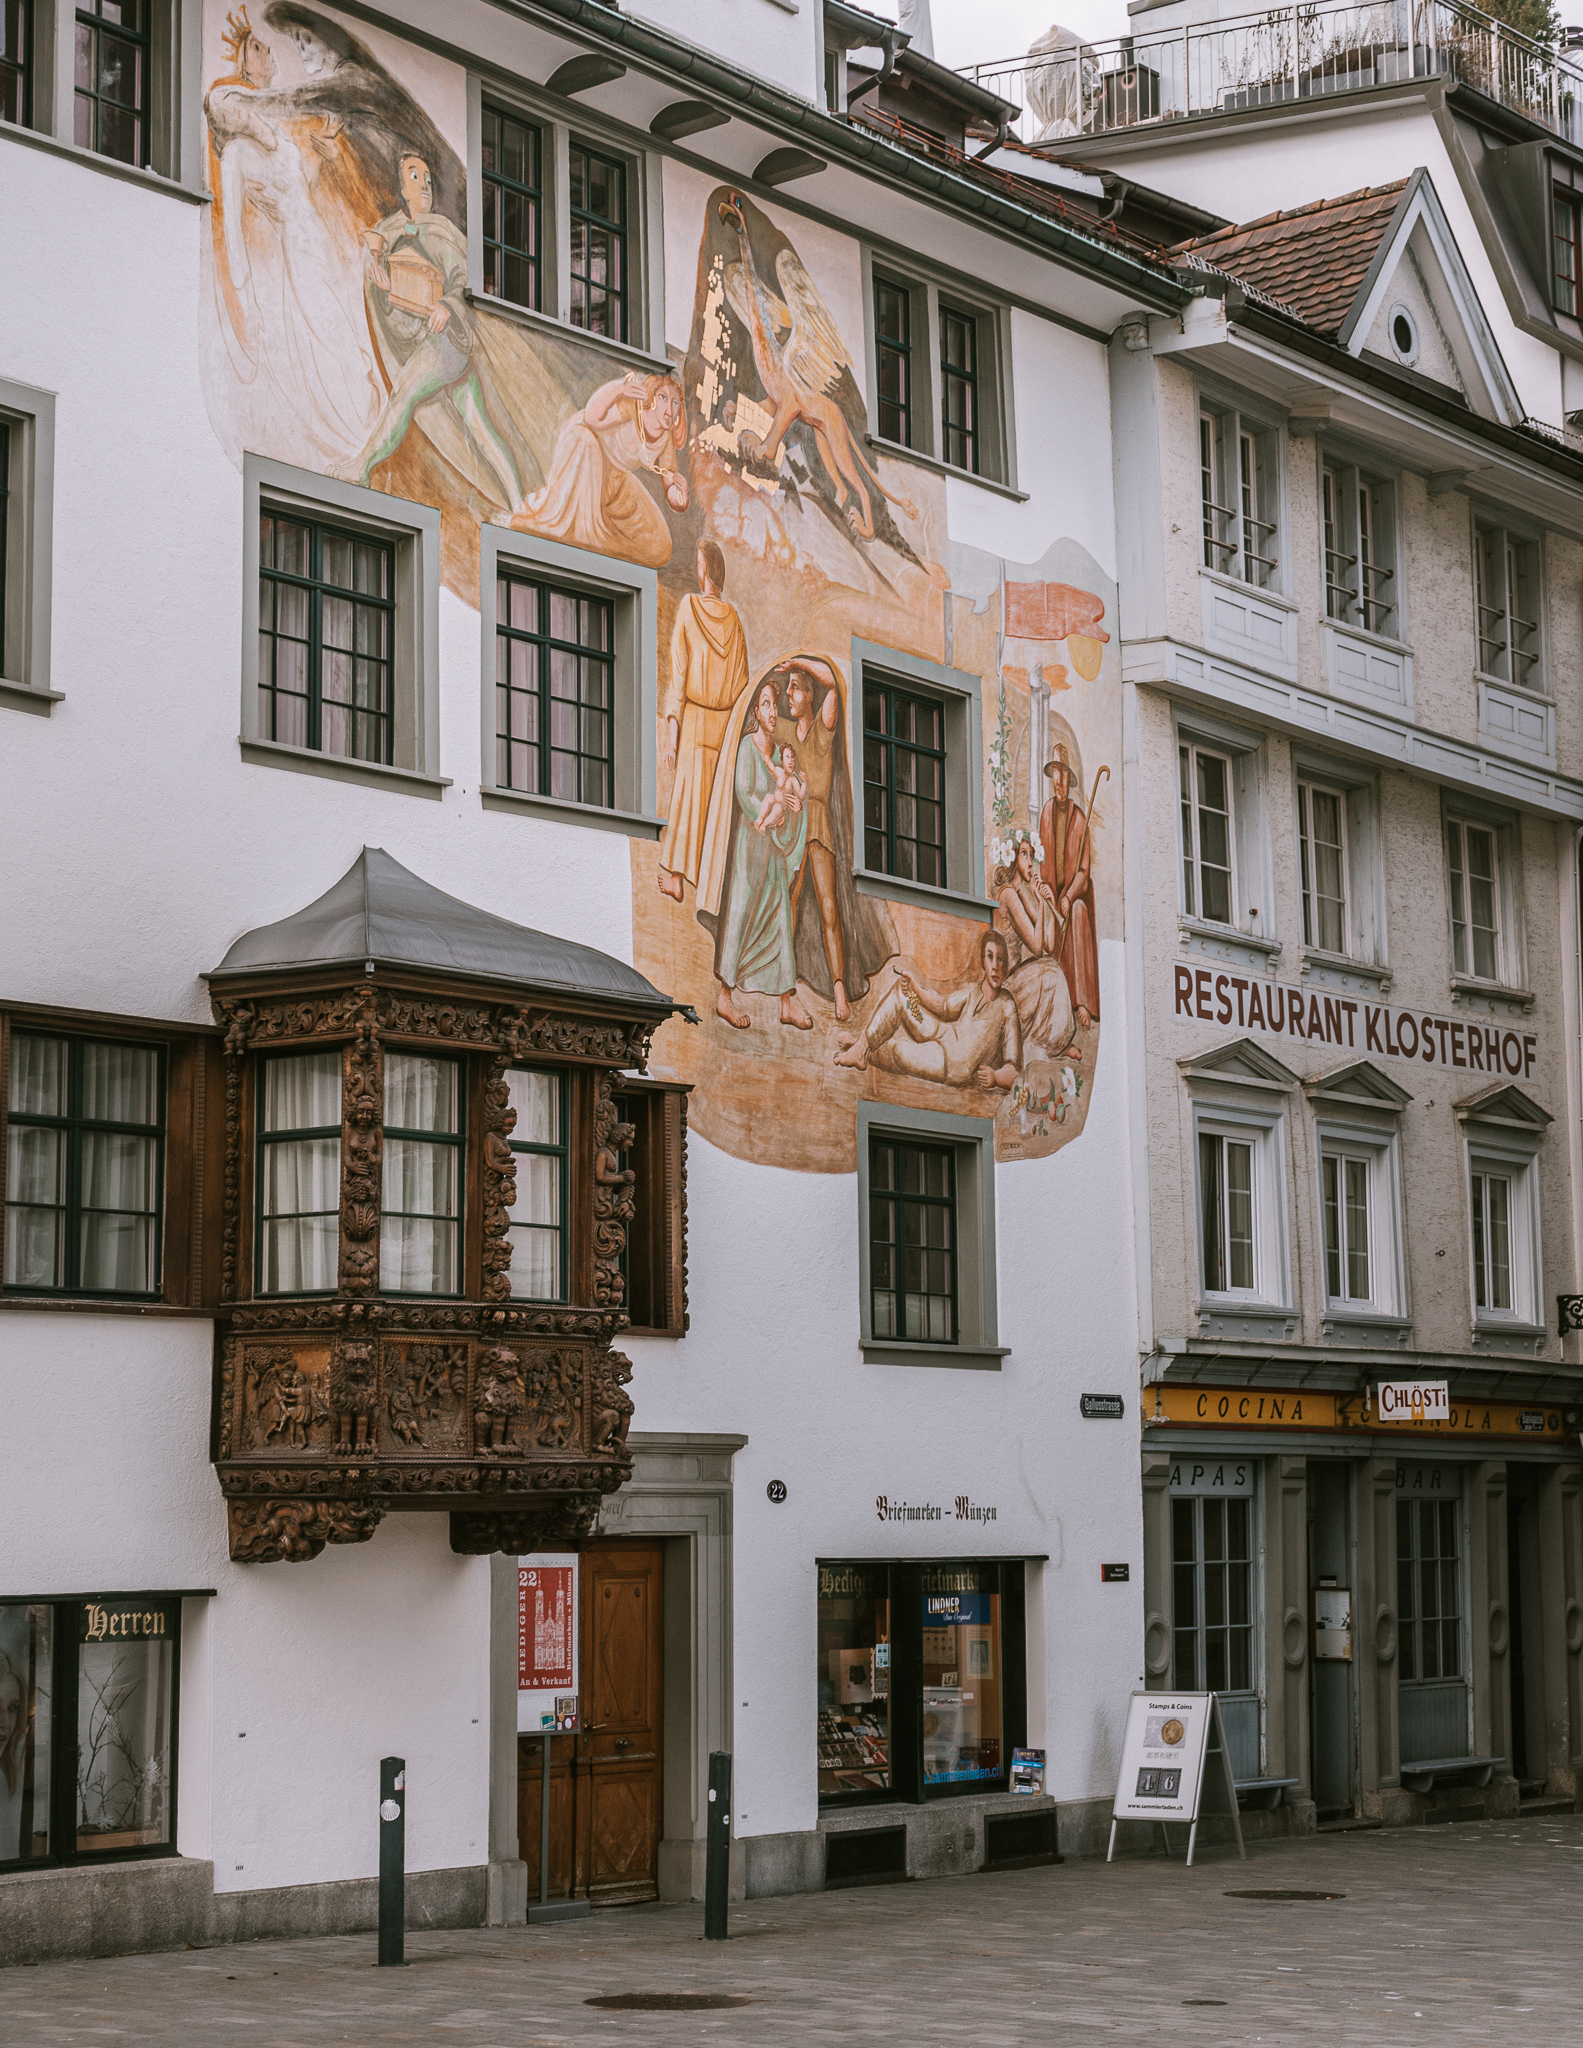 A facade of a house in St. Gallen, featuring a detailed, carved, wooden window and a colorful fresco of some peasant farmers and what looks to be Mary, Joseph and Jesus.